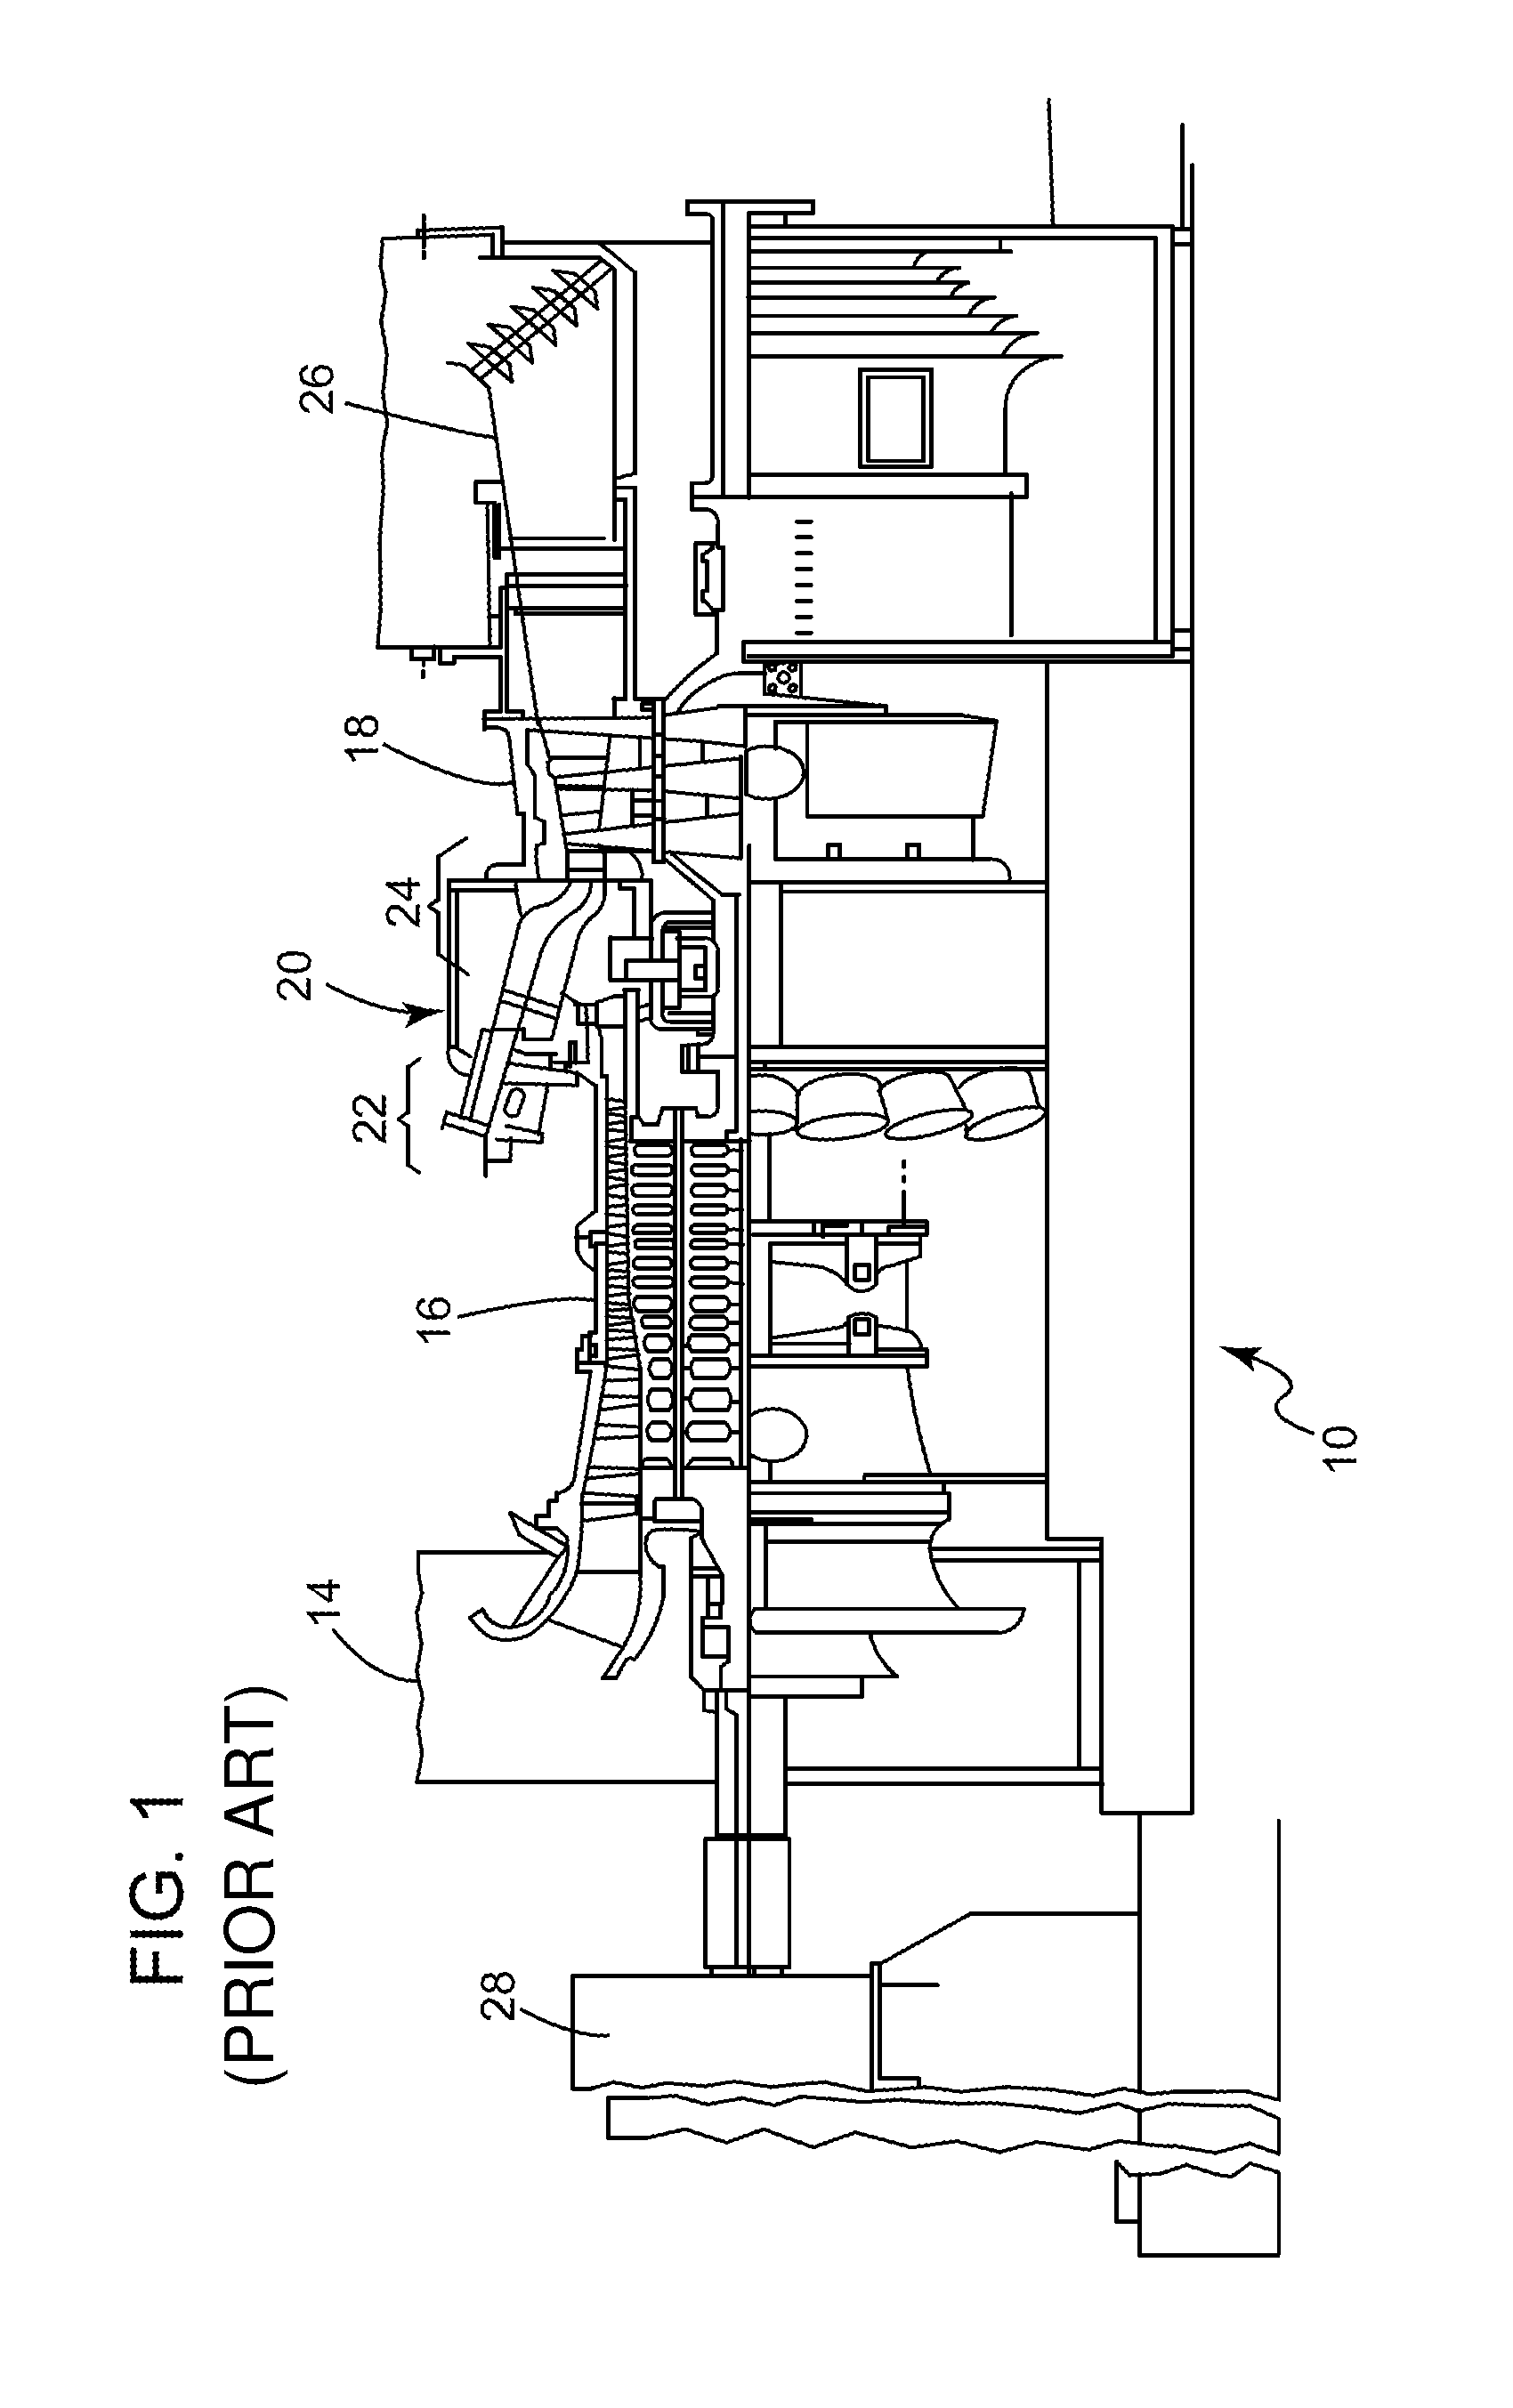 Secondary combustion system for reducing the level of emissions generated by a turbomachine